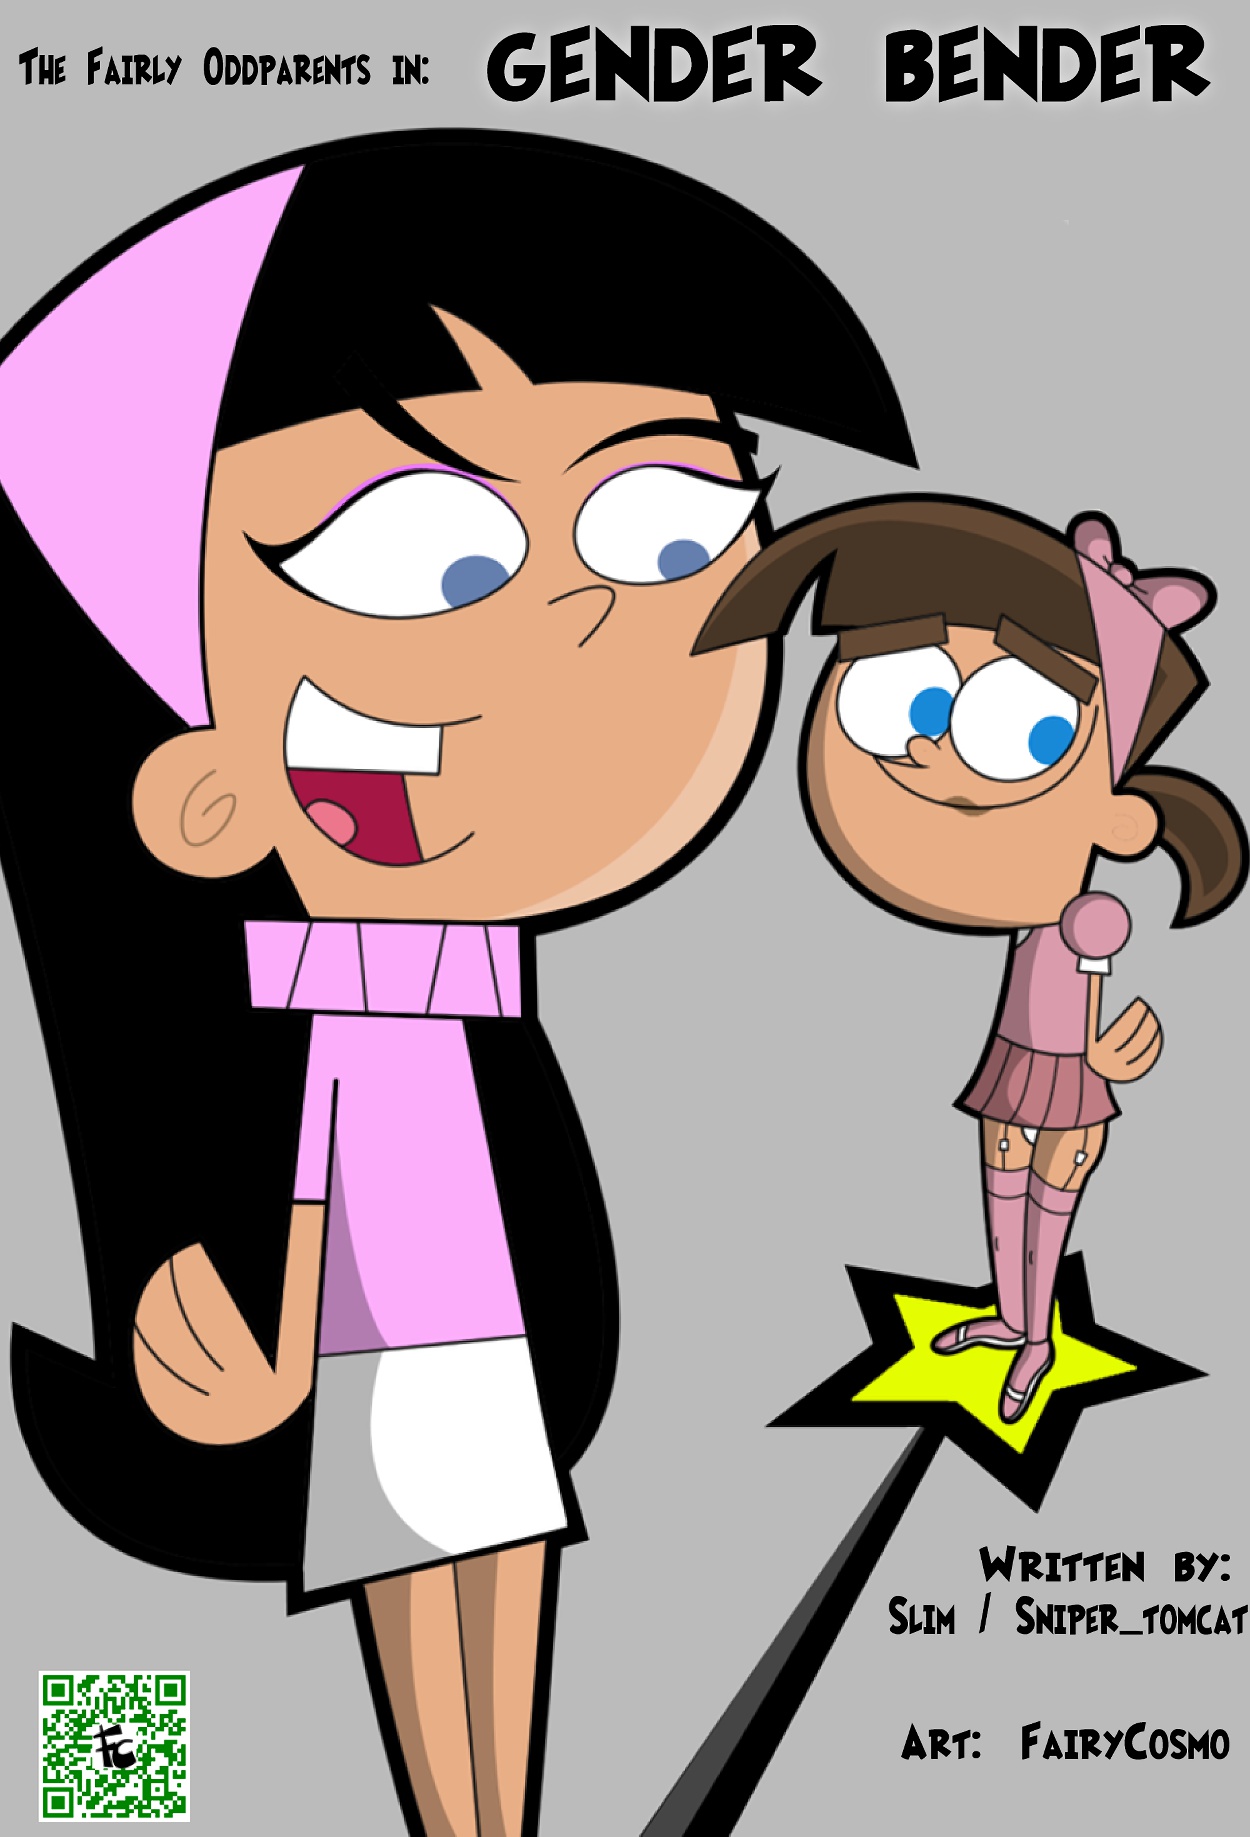 FairyCosmo - Gender Bender (The Fairly OddParents) porn comic.